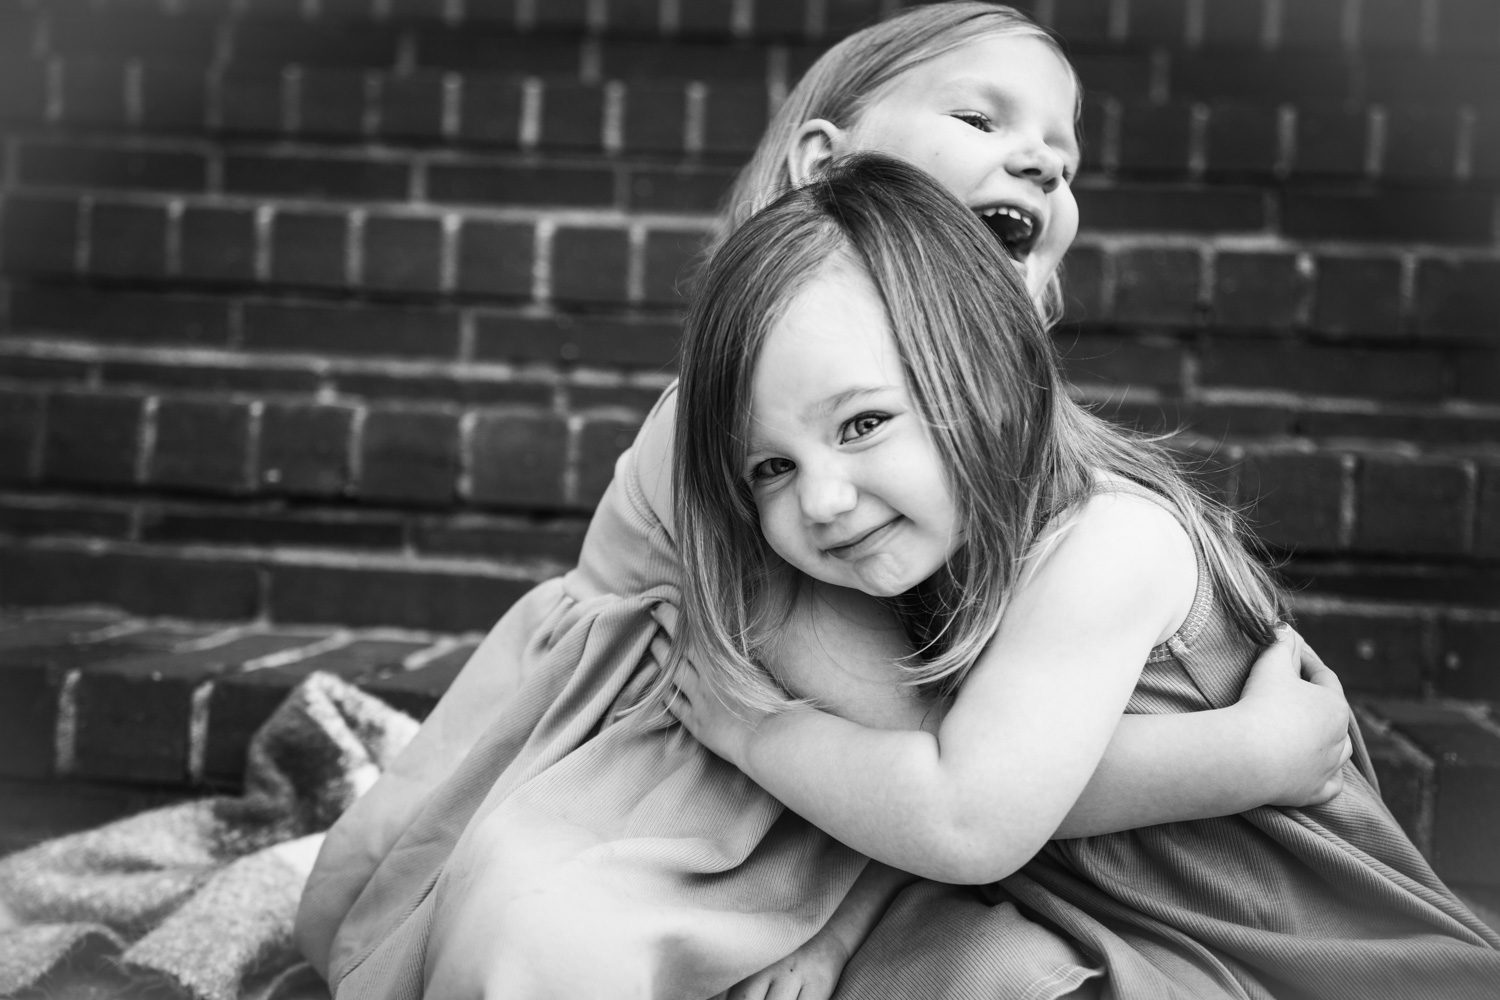 Sisters give each other a hug during family photos at A&E Farm in College Grove TN